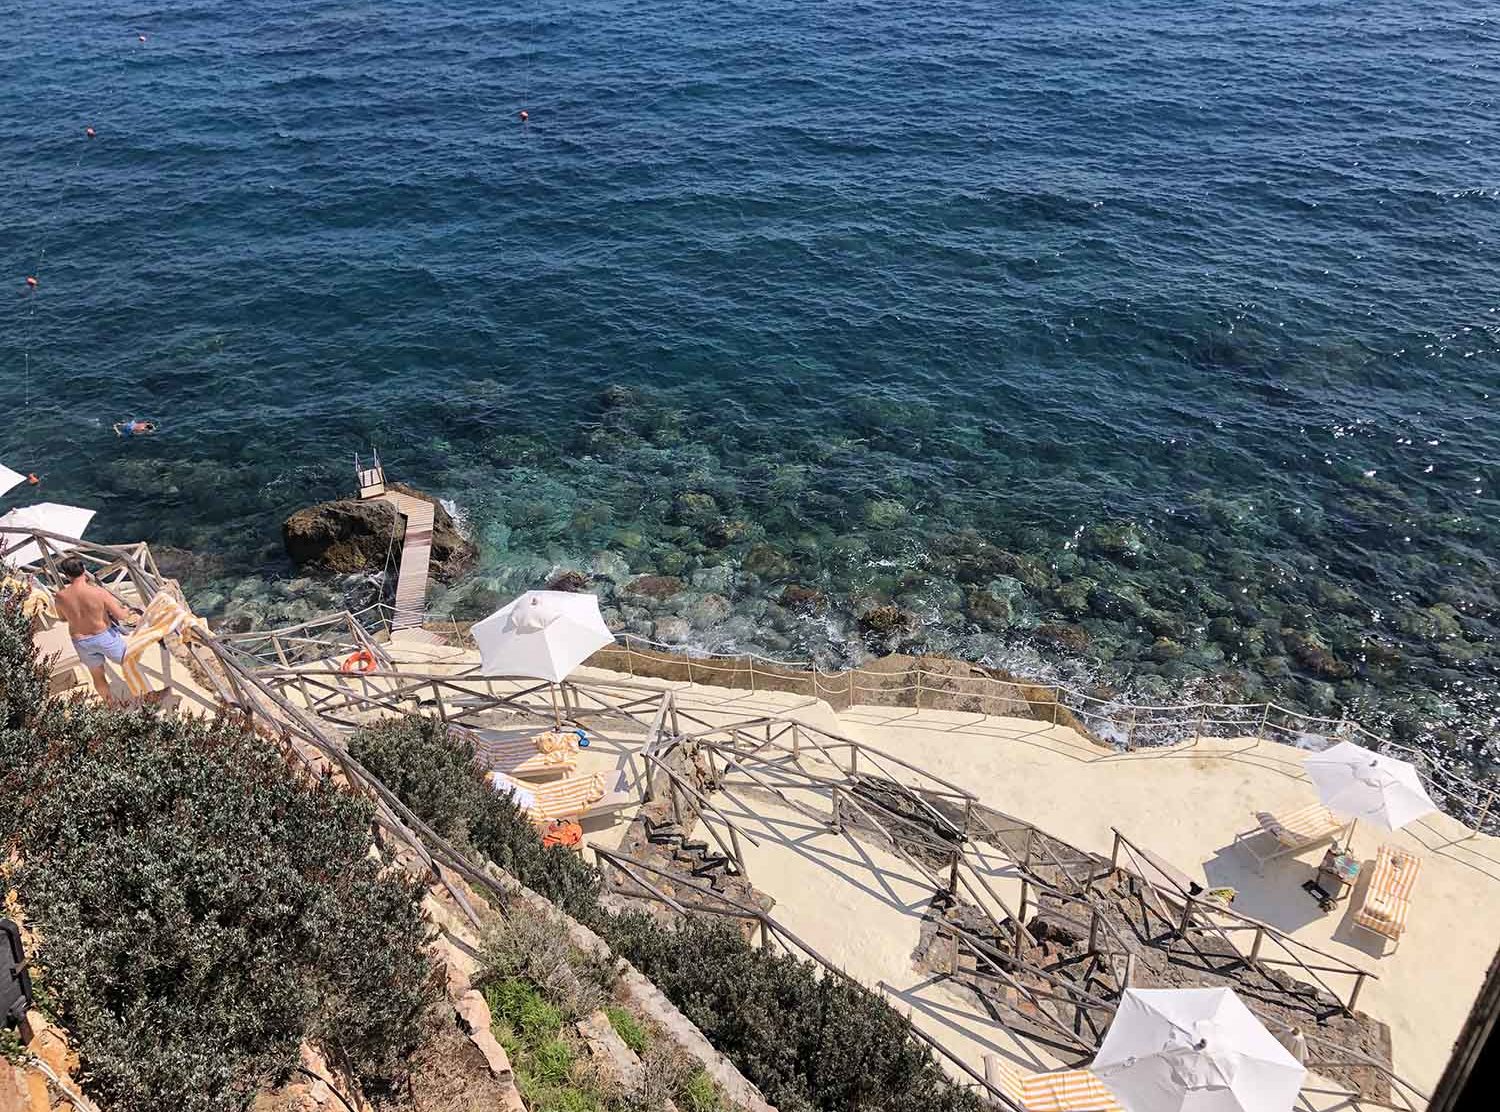 Il Pellicano Started as a playground for European royalty, Hollywood actors and society figures who enjoyed the hotel's barefoot ease and privacy.